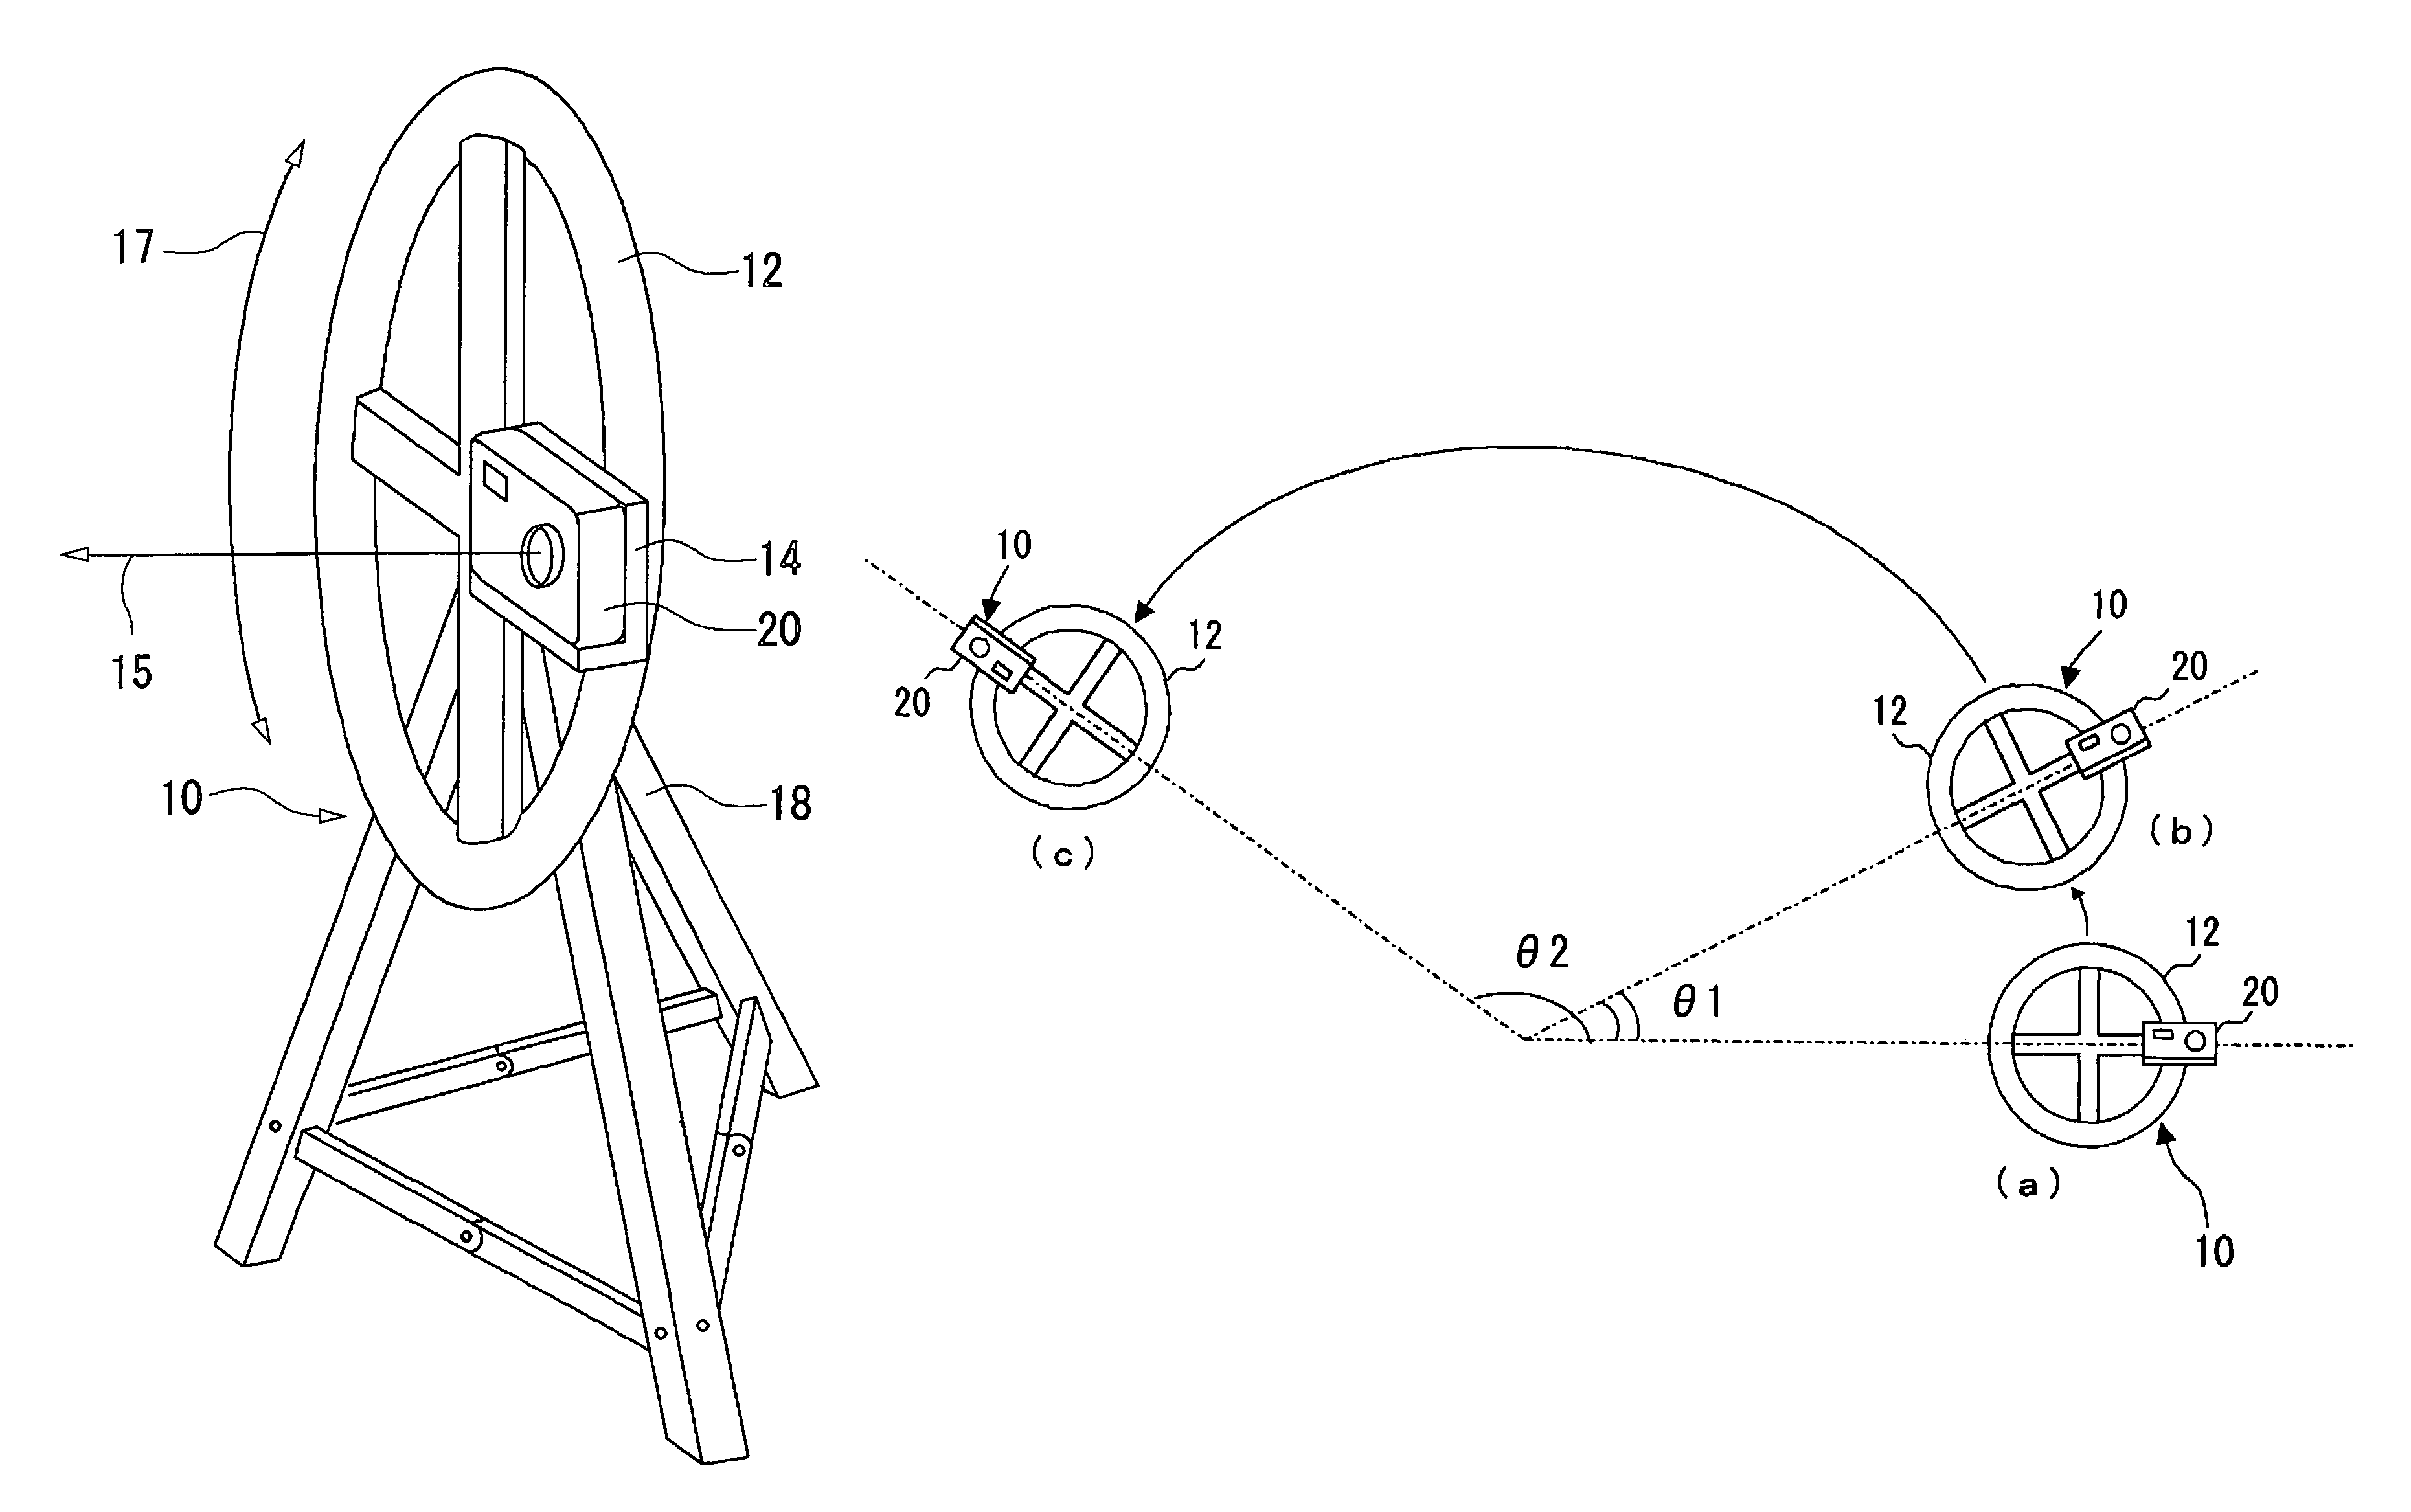 Photographing assist device and image processing method for achieving simple stereoscopic photographing